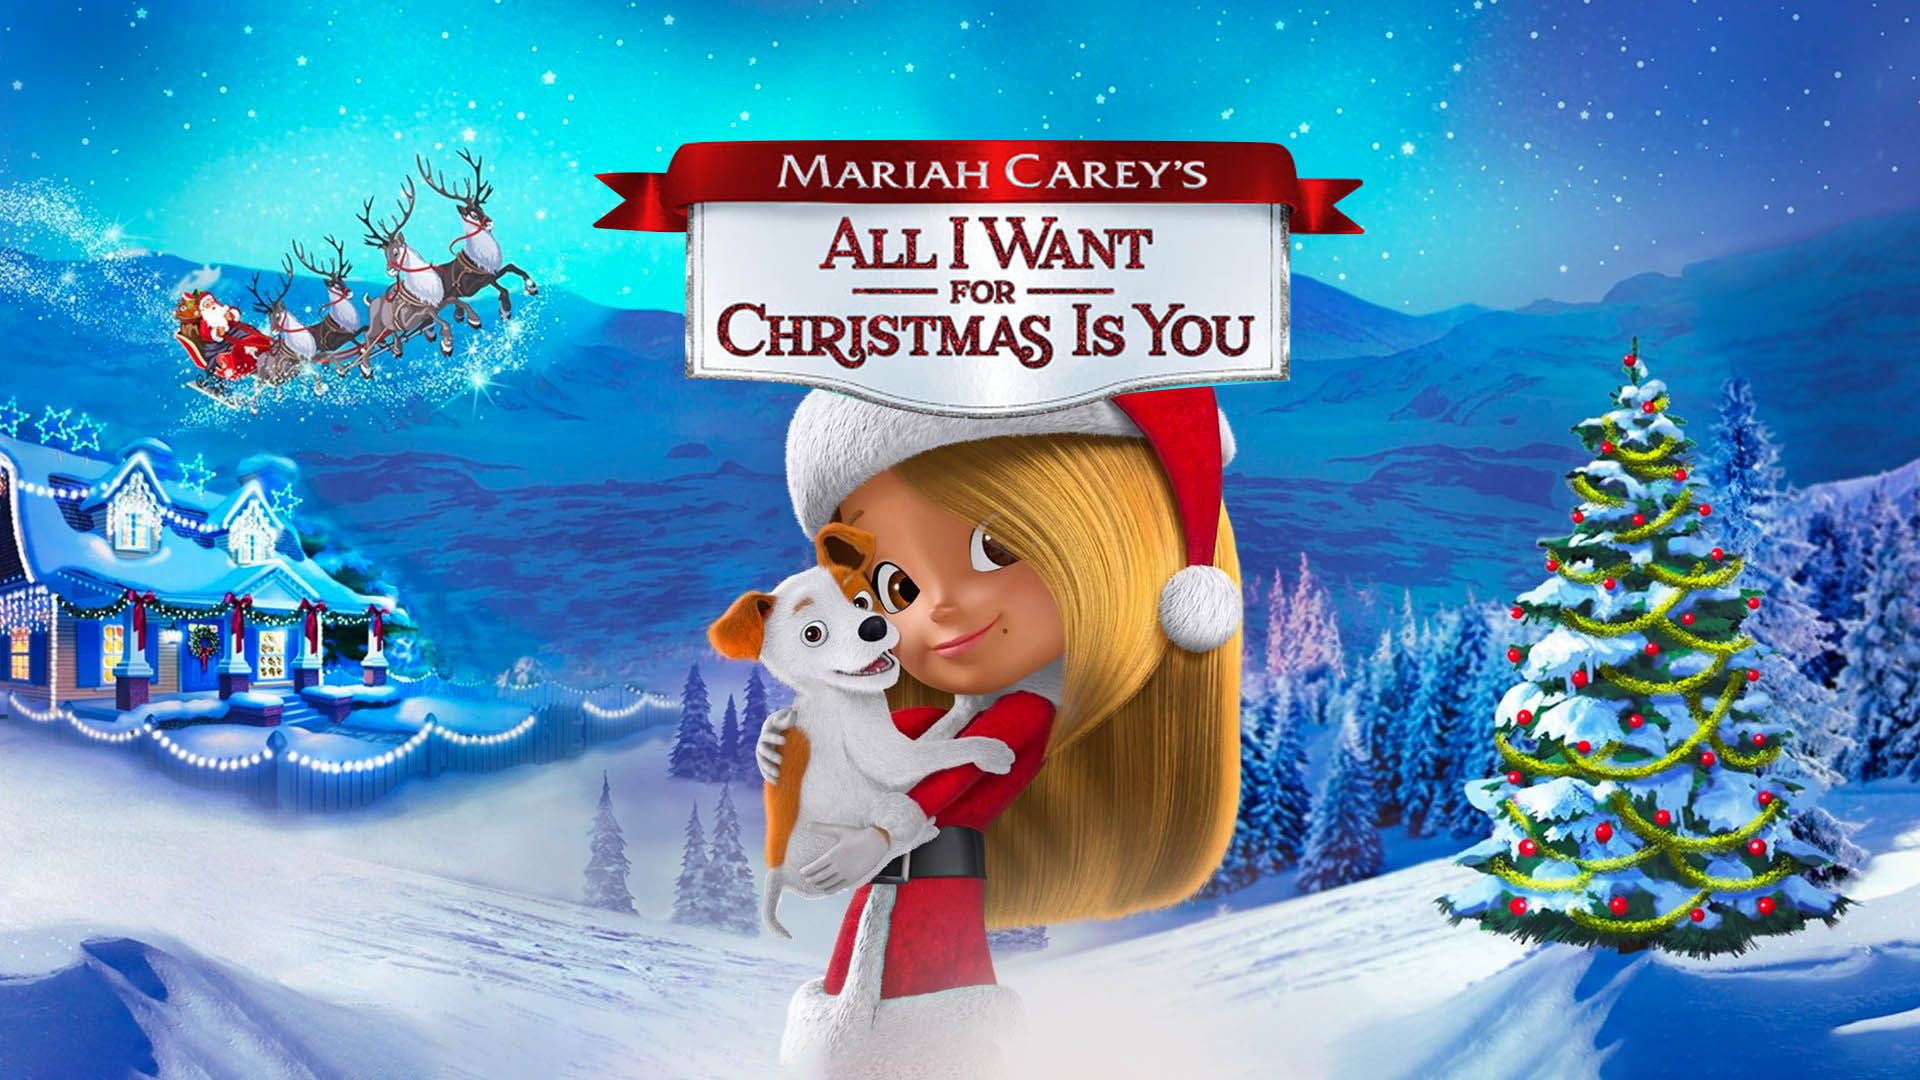 Watch Mariah Carey's All I Want for Christmas Is You Online | Stream Full Movies